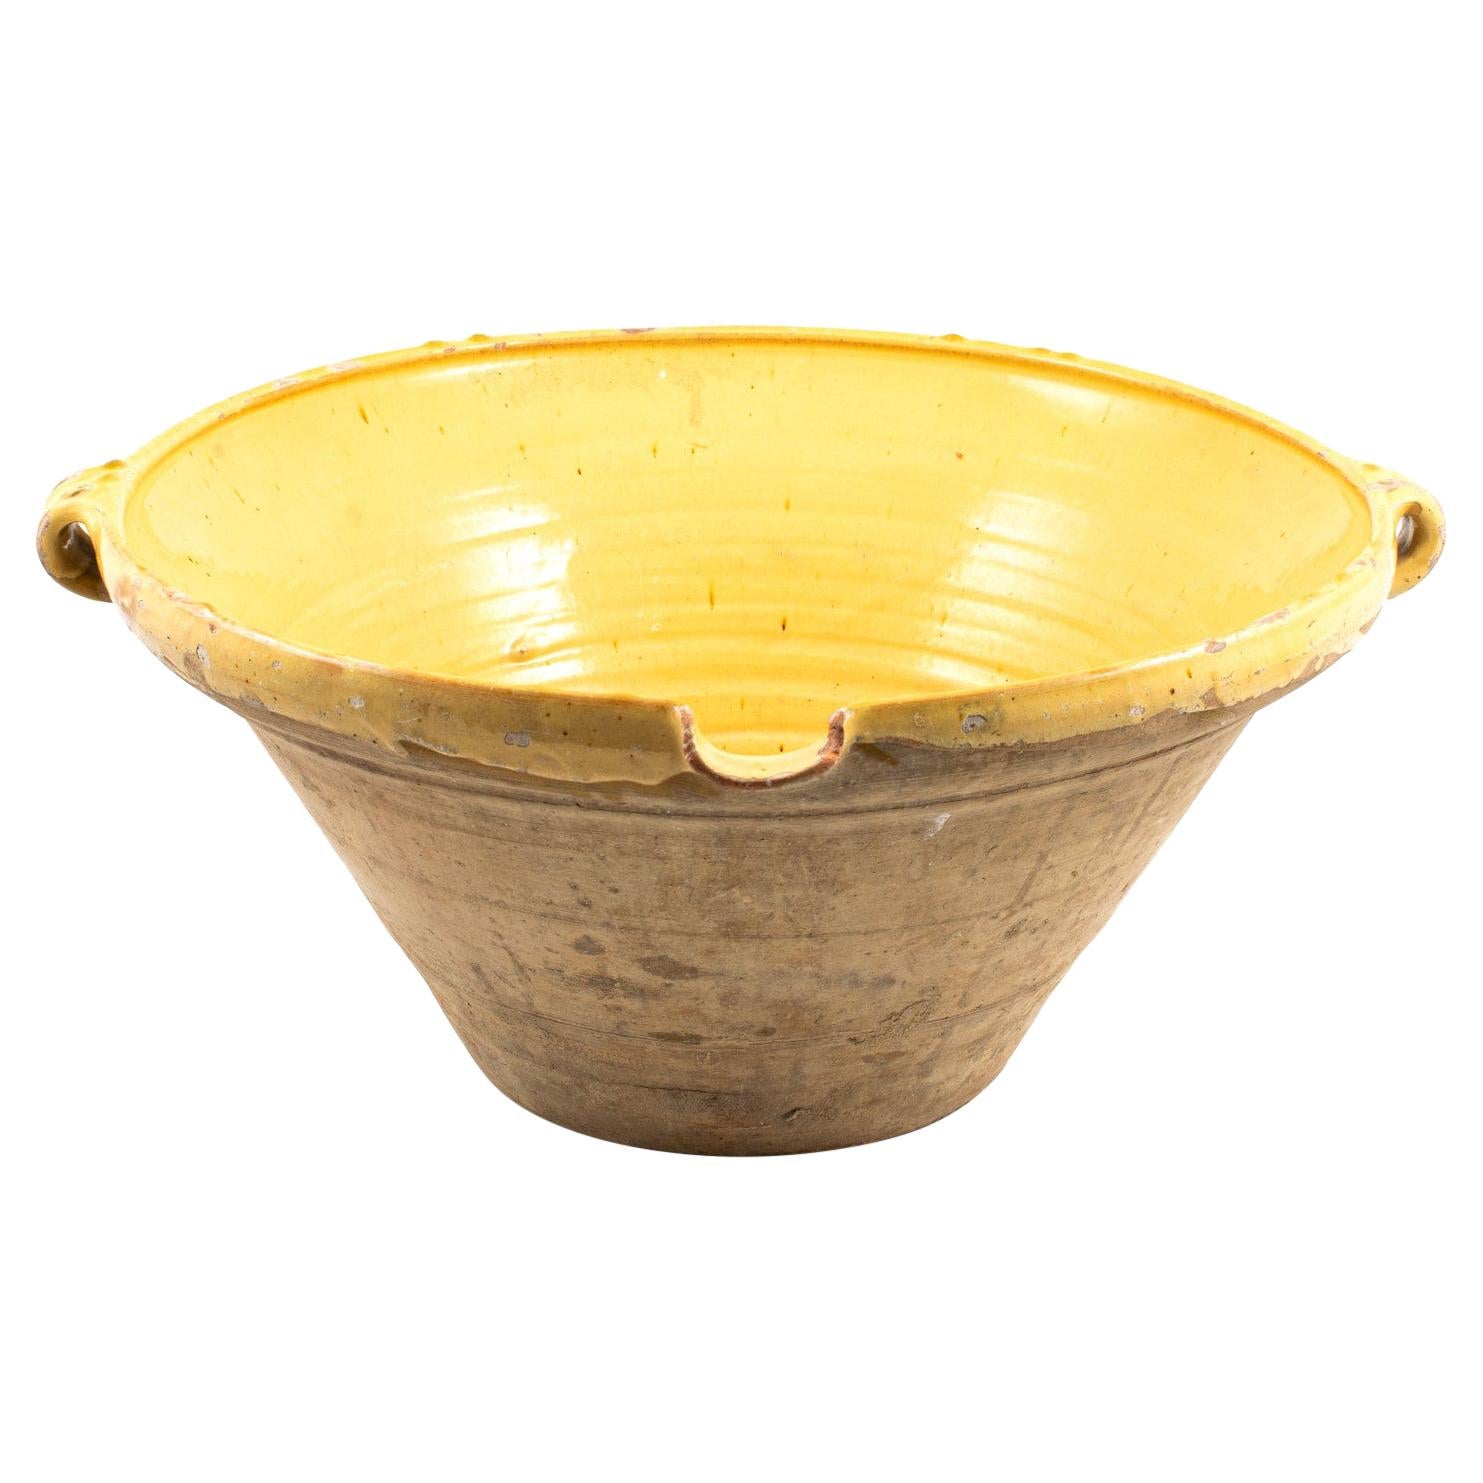 Large French Bowl 'Tian' with Yellow Glaze, 19th Century